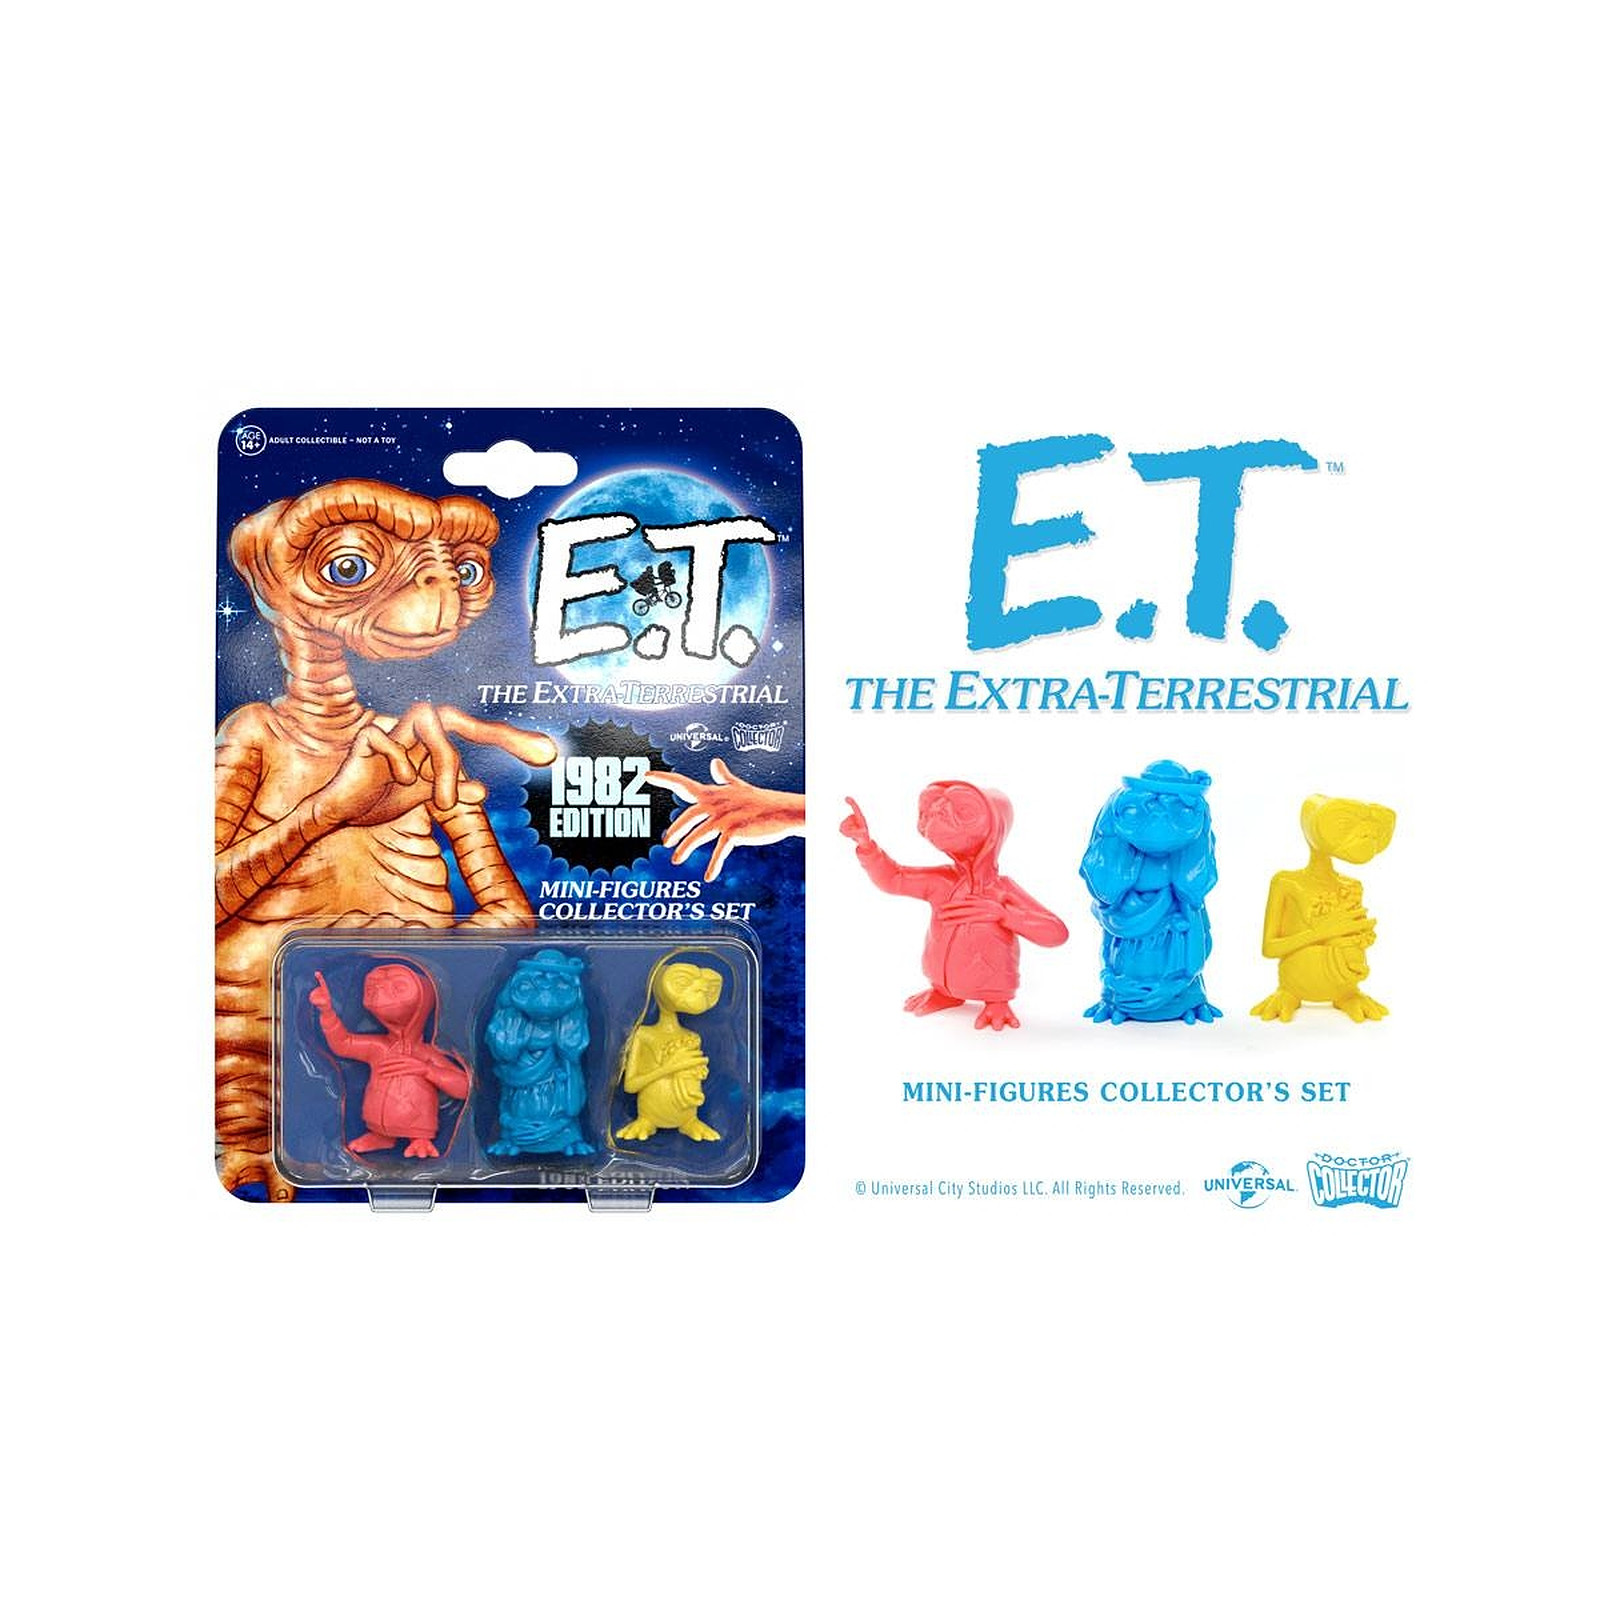 E.T. l'extra-terrestre - Pack 3 mini figurines Collector's Set 1982 Edition 5 cm - Figurines Doctor Collector